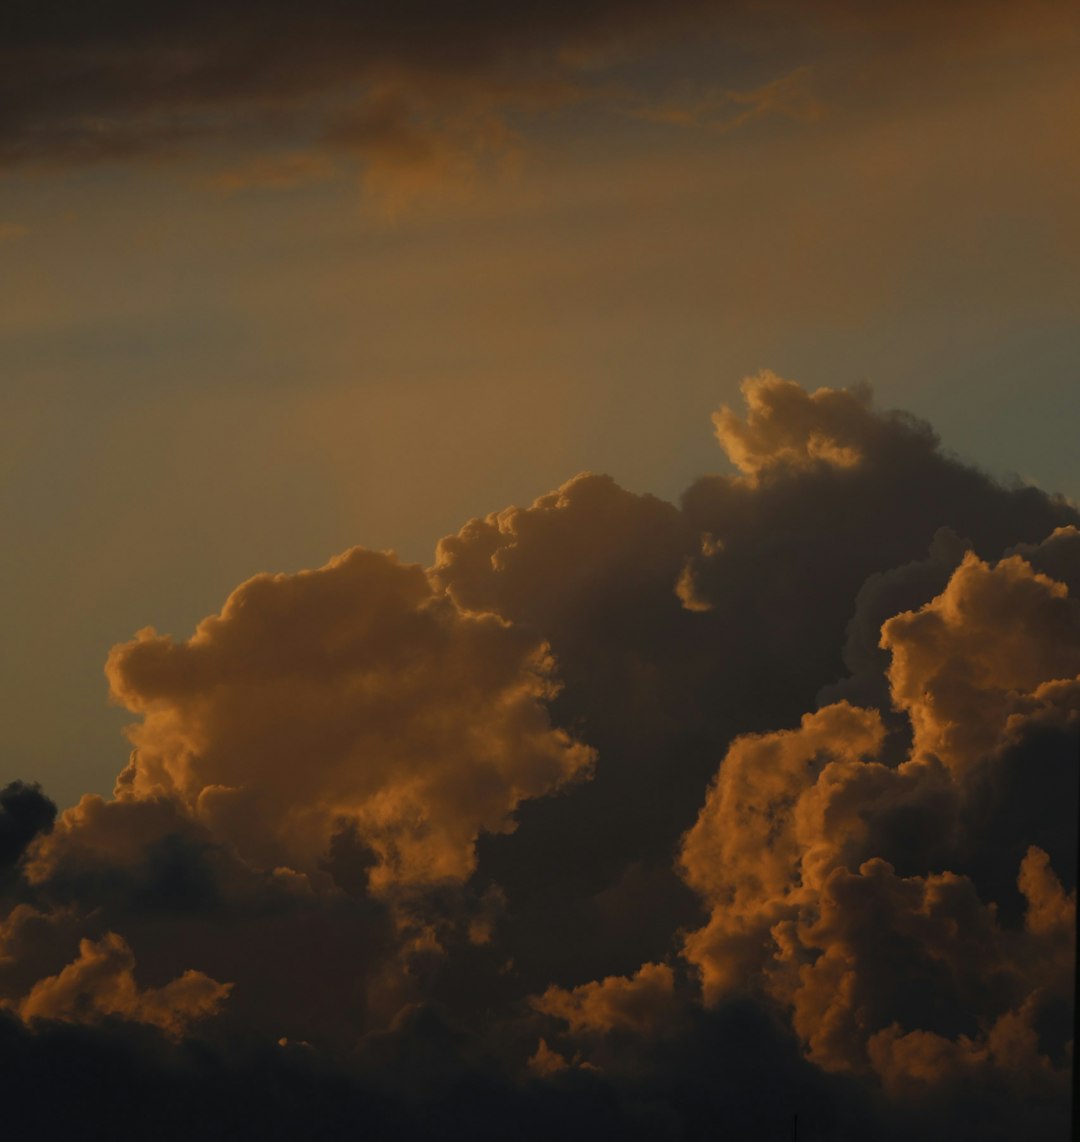 cloudy sky during golden hour